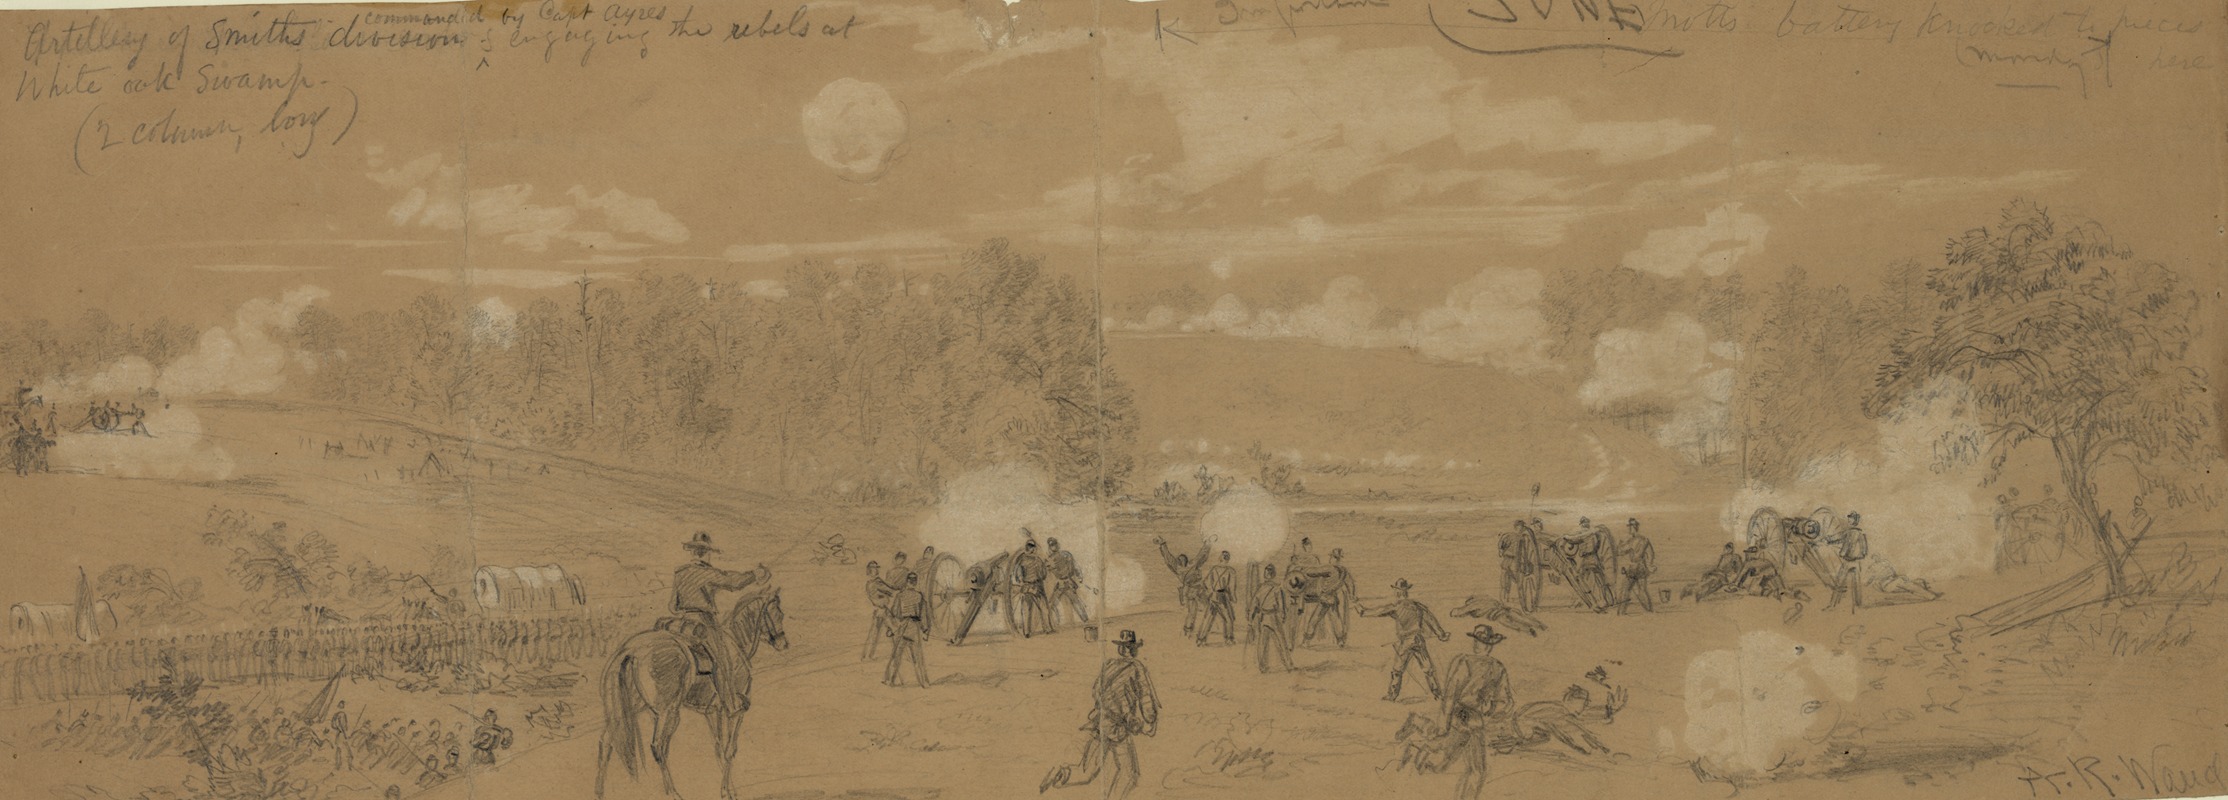 Alfred Rudolph Waud - Artillery of Smith’s division commanded by Capt. Ayres engaging the rebels at White Oak Swamp